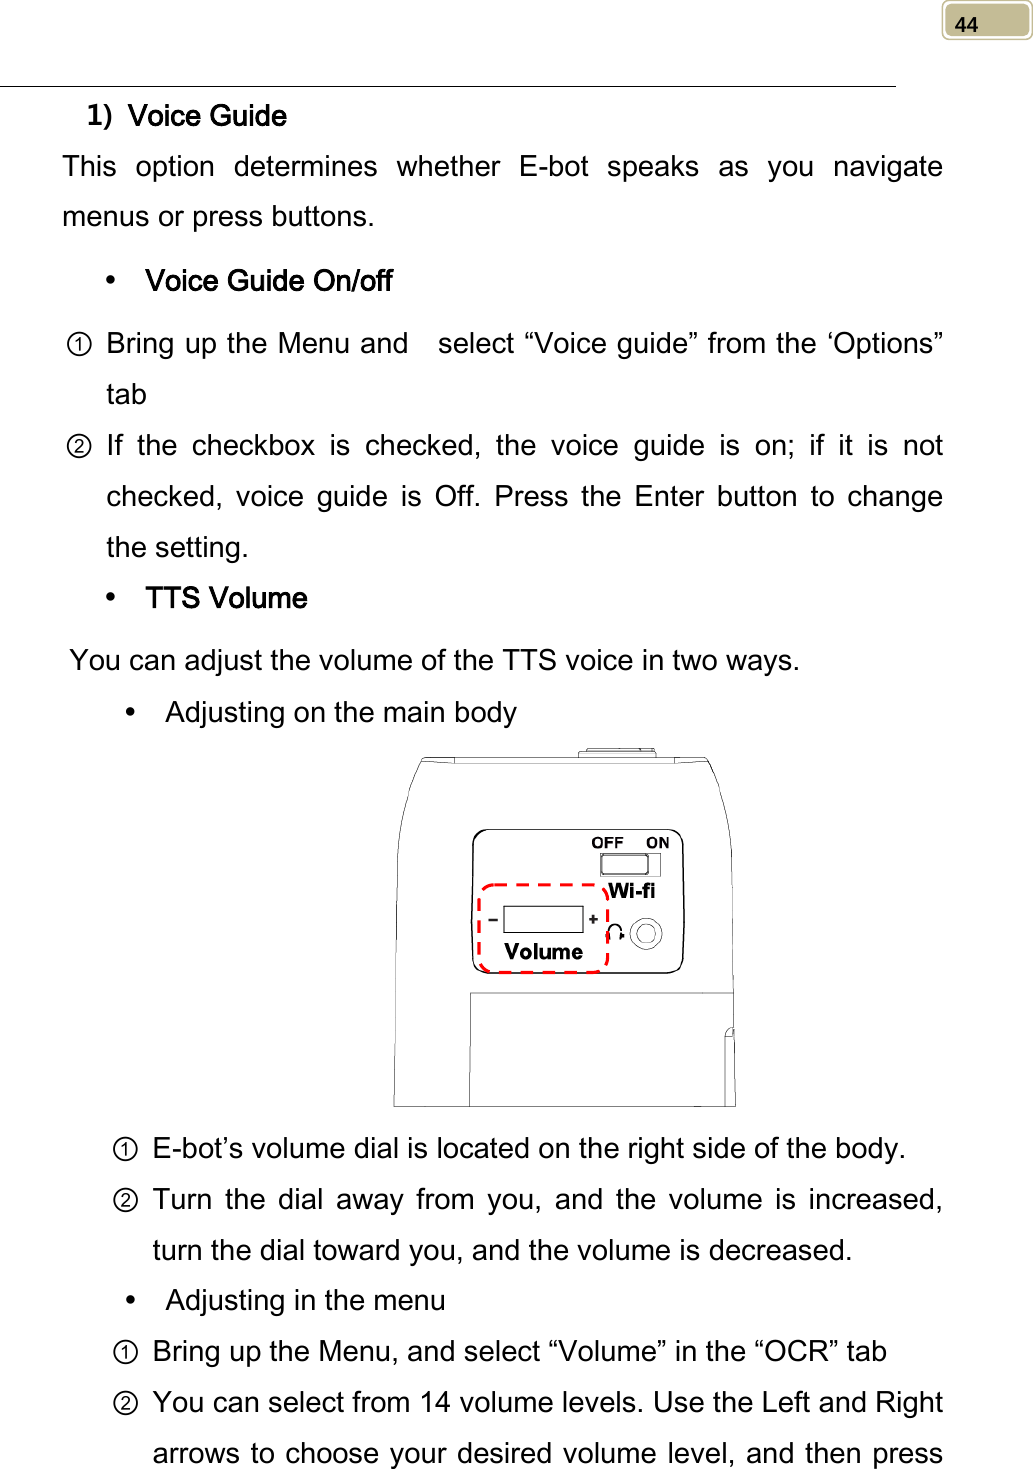   44 1) Voice Guide This option determines whether E-bot speaks as you navigate menus or press buttons.  Voice Guide On/off ① Bring up the Menu and   select “Voice guide” from the ‘Options” tab ② If  the  checkbox is checked, the voice guide is on; if it is not checked,  voice guide is Off. Press the  Enter button to change the setting.  TTS Volume You can adjust the volume of the TTS voice in two ways.  Adjusting on the main body  ① E-bot’s volume dial is located on the right side of the body. ② Turn the dial away from you, and  the volume is increased, turn the dial toward you, and the volume is decreased.  Adjusting in the menu ① Bring up the Menu, and select “Volume” in the “OCR” tab ② You can select from 14 volume levels. Use the Left and Right arrows to choose your desired volume level, and then press 